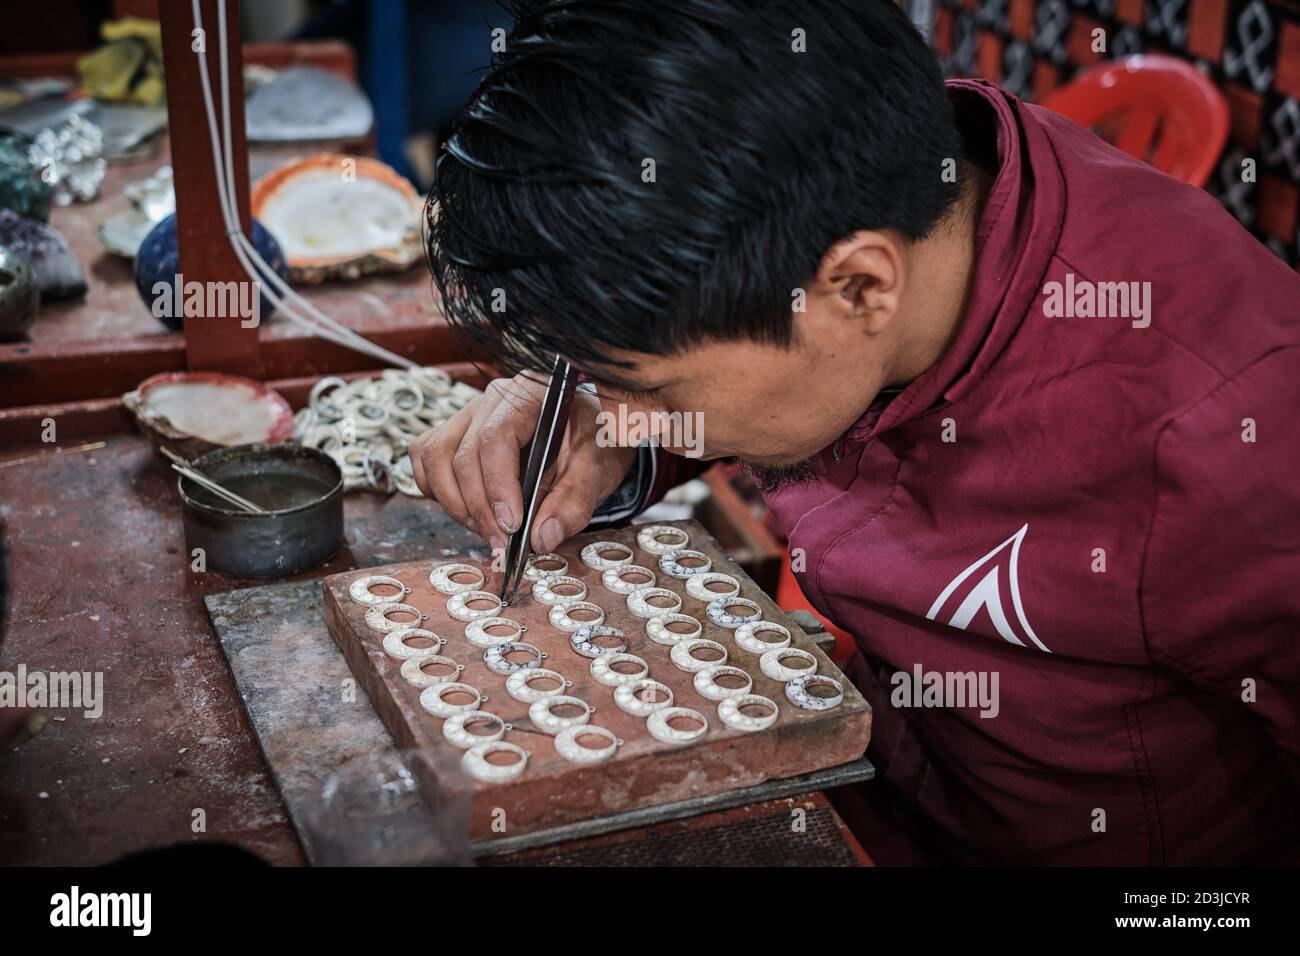 A silversmith jeweller in Pisac Pisaq Market, Peru, making earrings jewellery jewelry. He is holding forceps tweezers and concentrating on his work Stock Photo